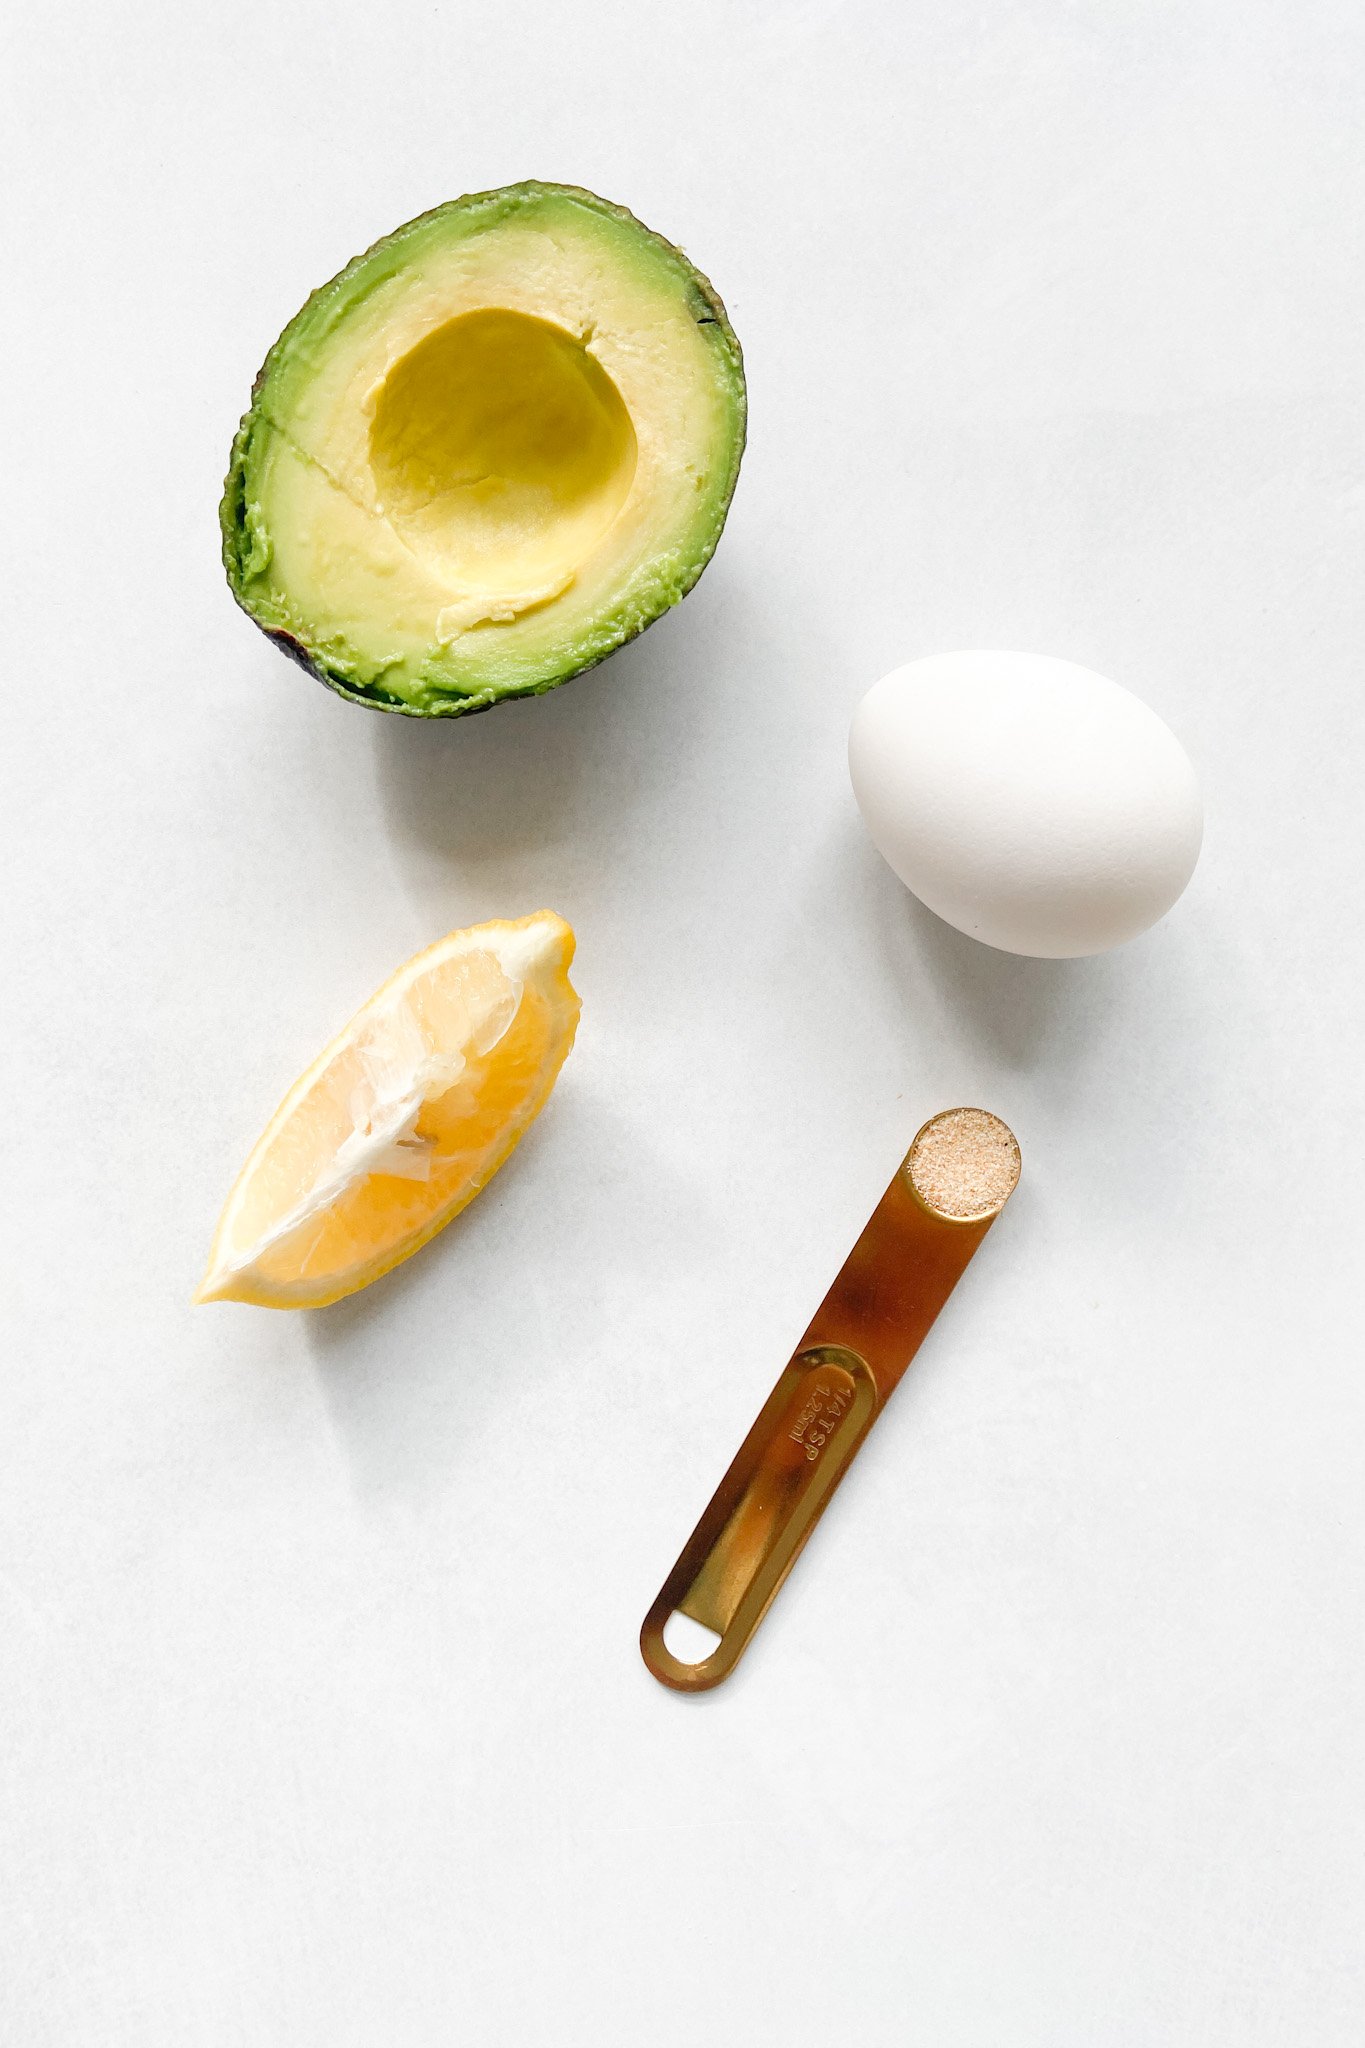 Ingredients to make avocado egg salad. See recipe card for detailed ingredient quantities.